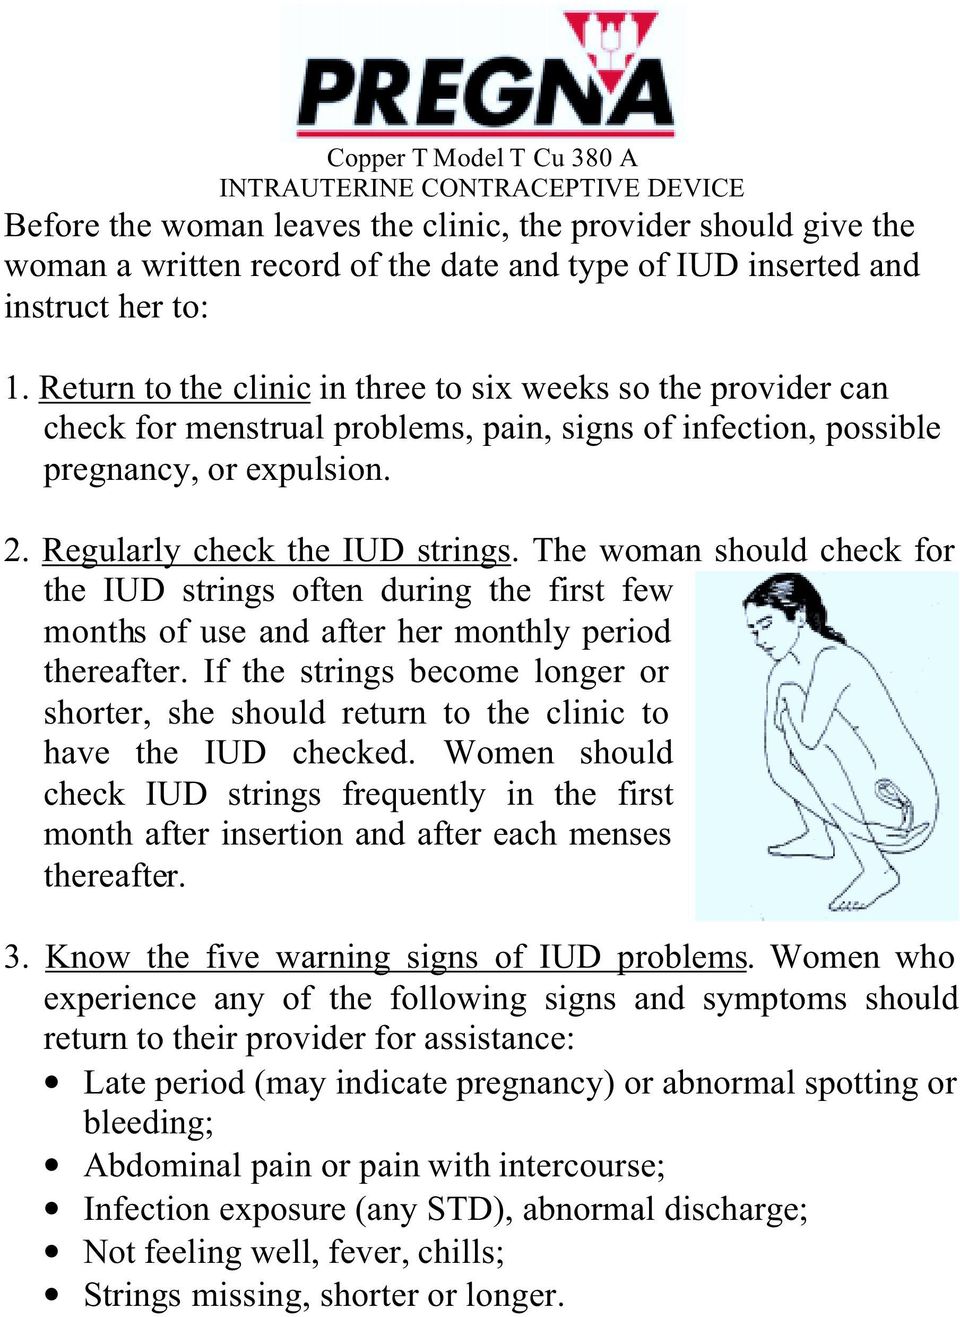 The woman should check for the IUD strings often during the first few months of use and after her monthly period thereafter.